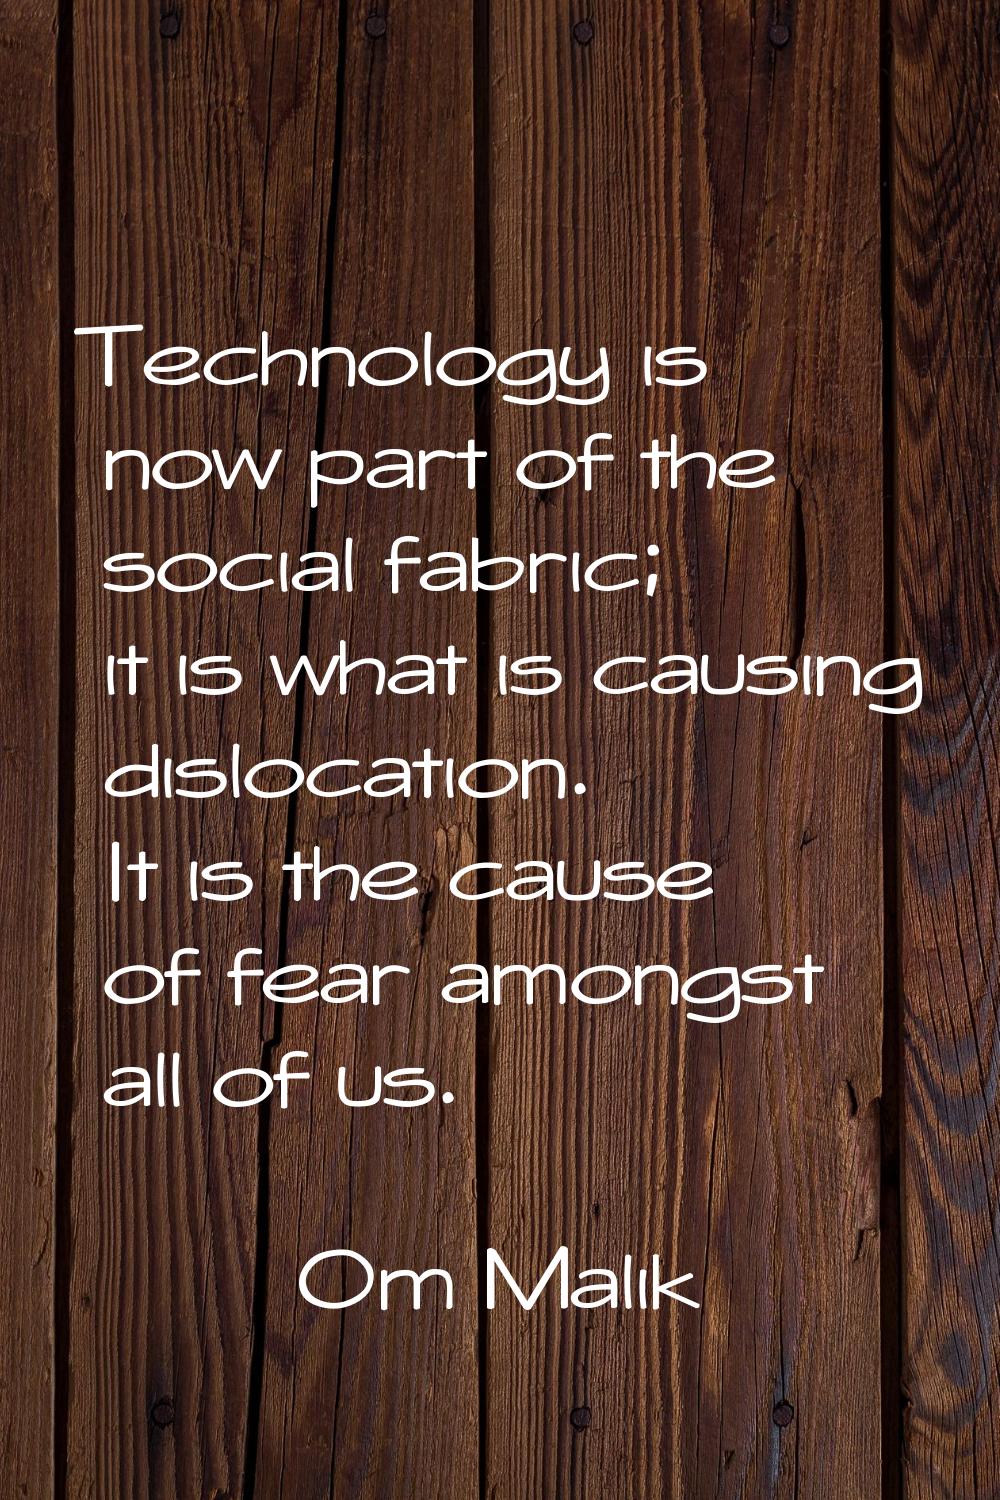 Technology is now part of the social fabric; it is what is causing dislocation. It is the cause of 